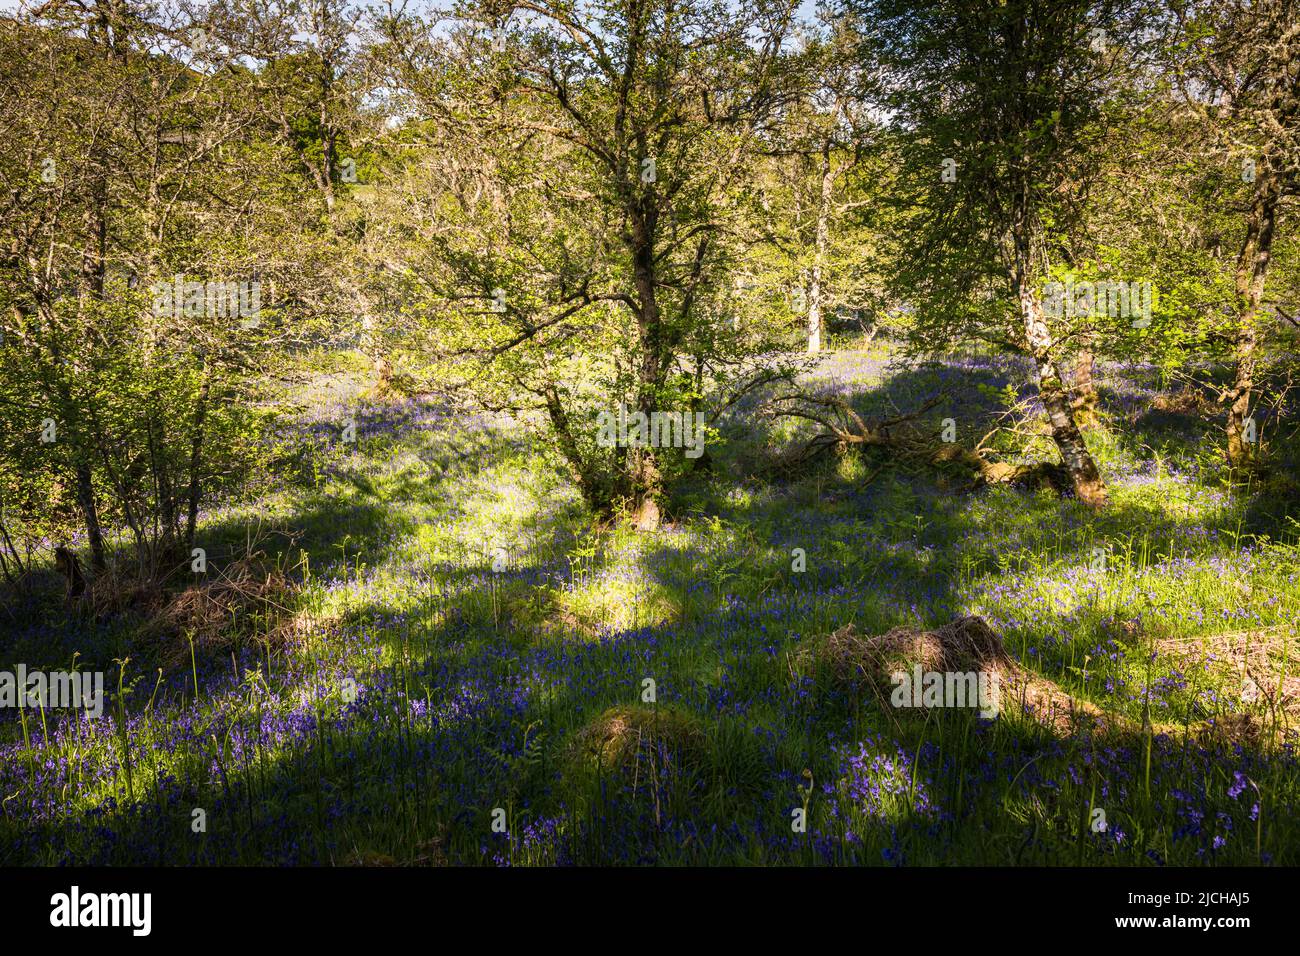 A sunny, summer HDR image of a Bluebell, Hyacinthoides non-scripta, wood on the banks of the River Glass in Strathglass, Scotland. 02 June 2022 Stock Photo